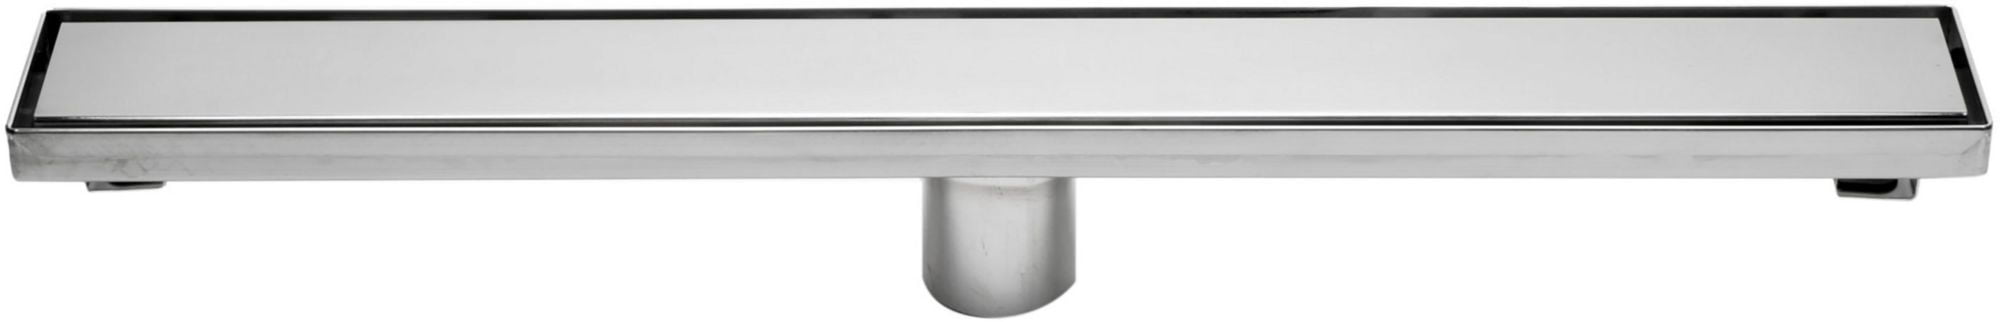 Picture of ALFI ABLD24B-PSS Modern Polished Stainless Steel Linear Shower Drain with Solid Cover - 24 in.